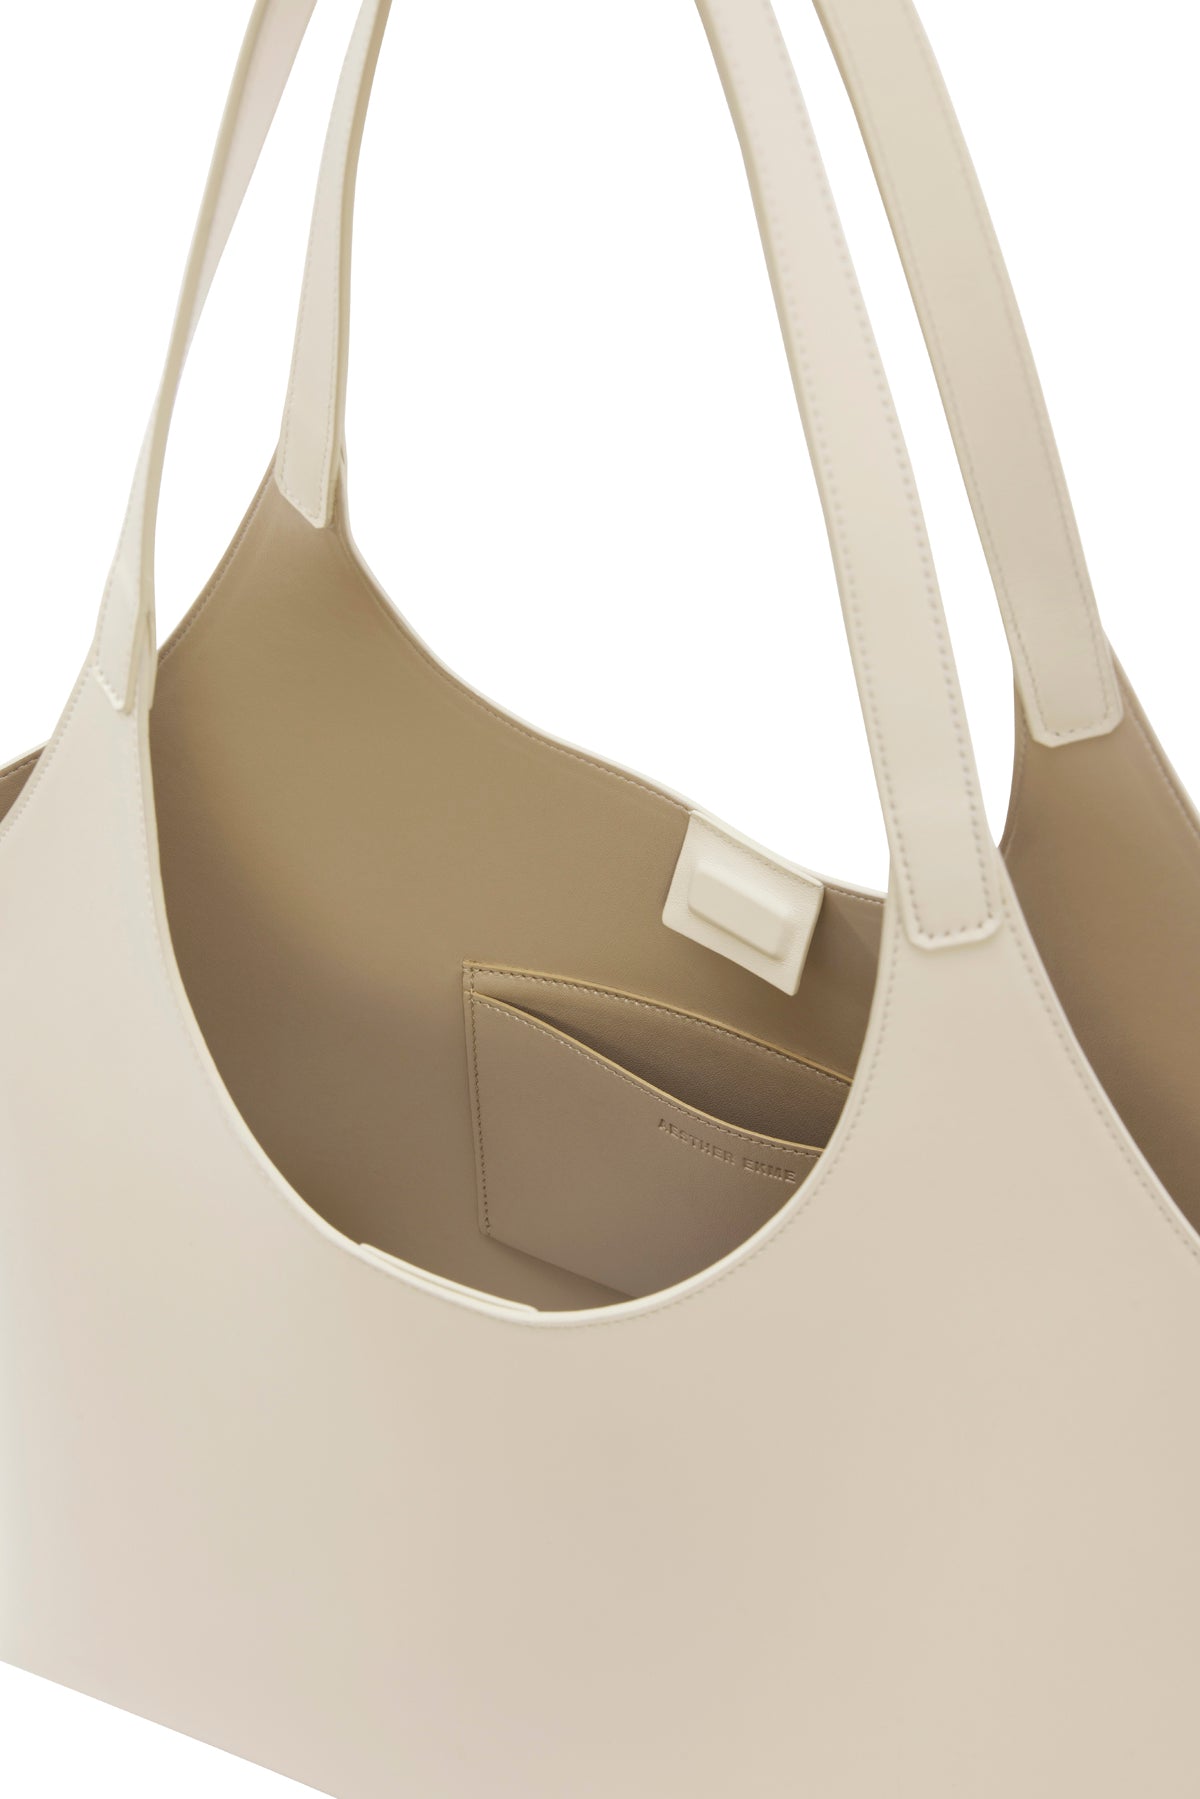 Lune Tote – AESTHER EKME